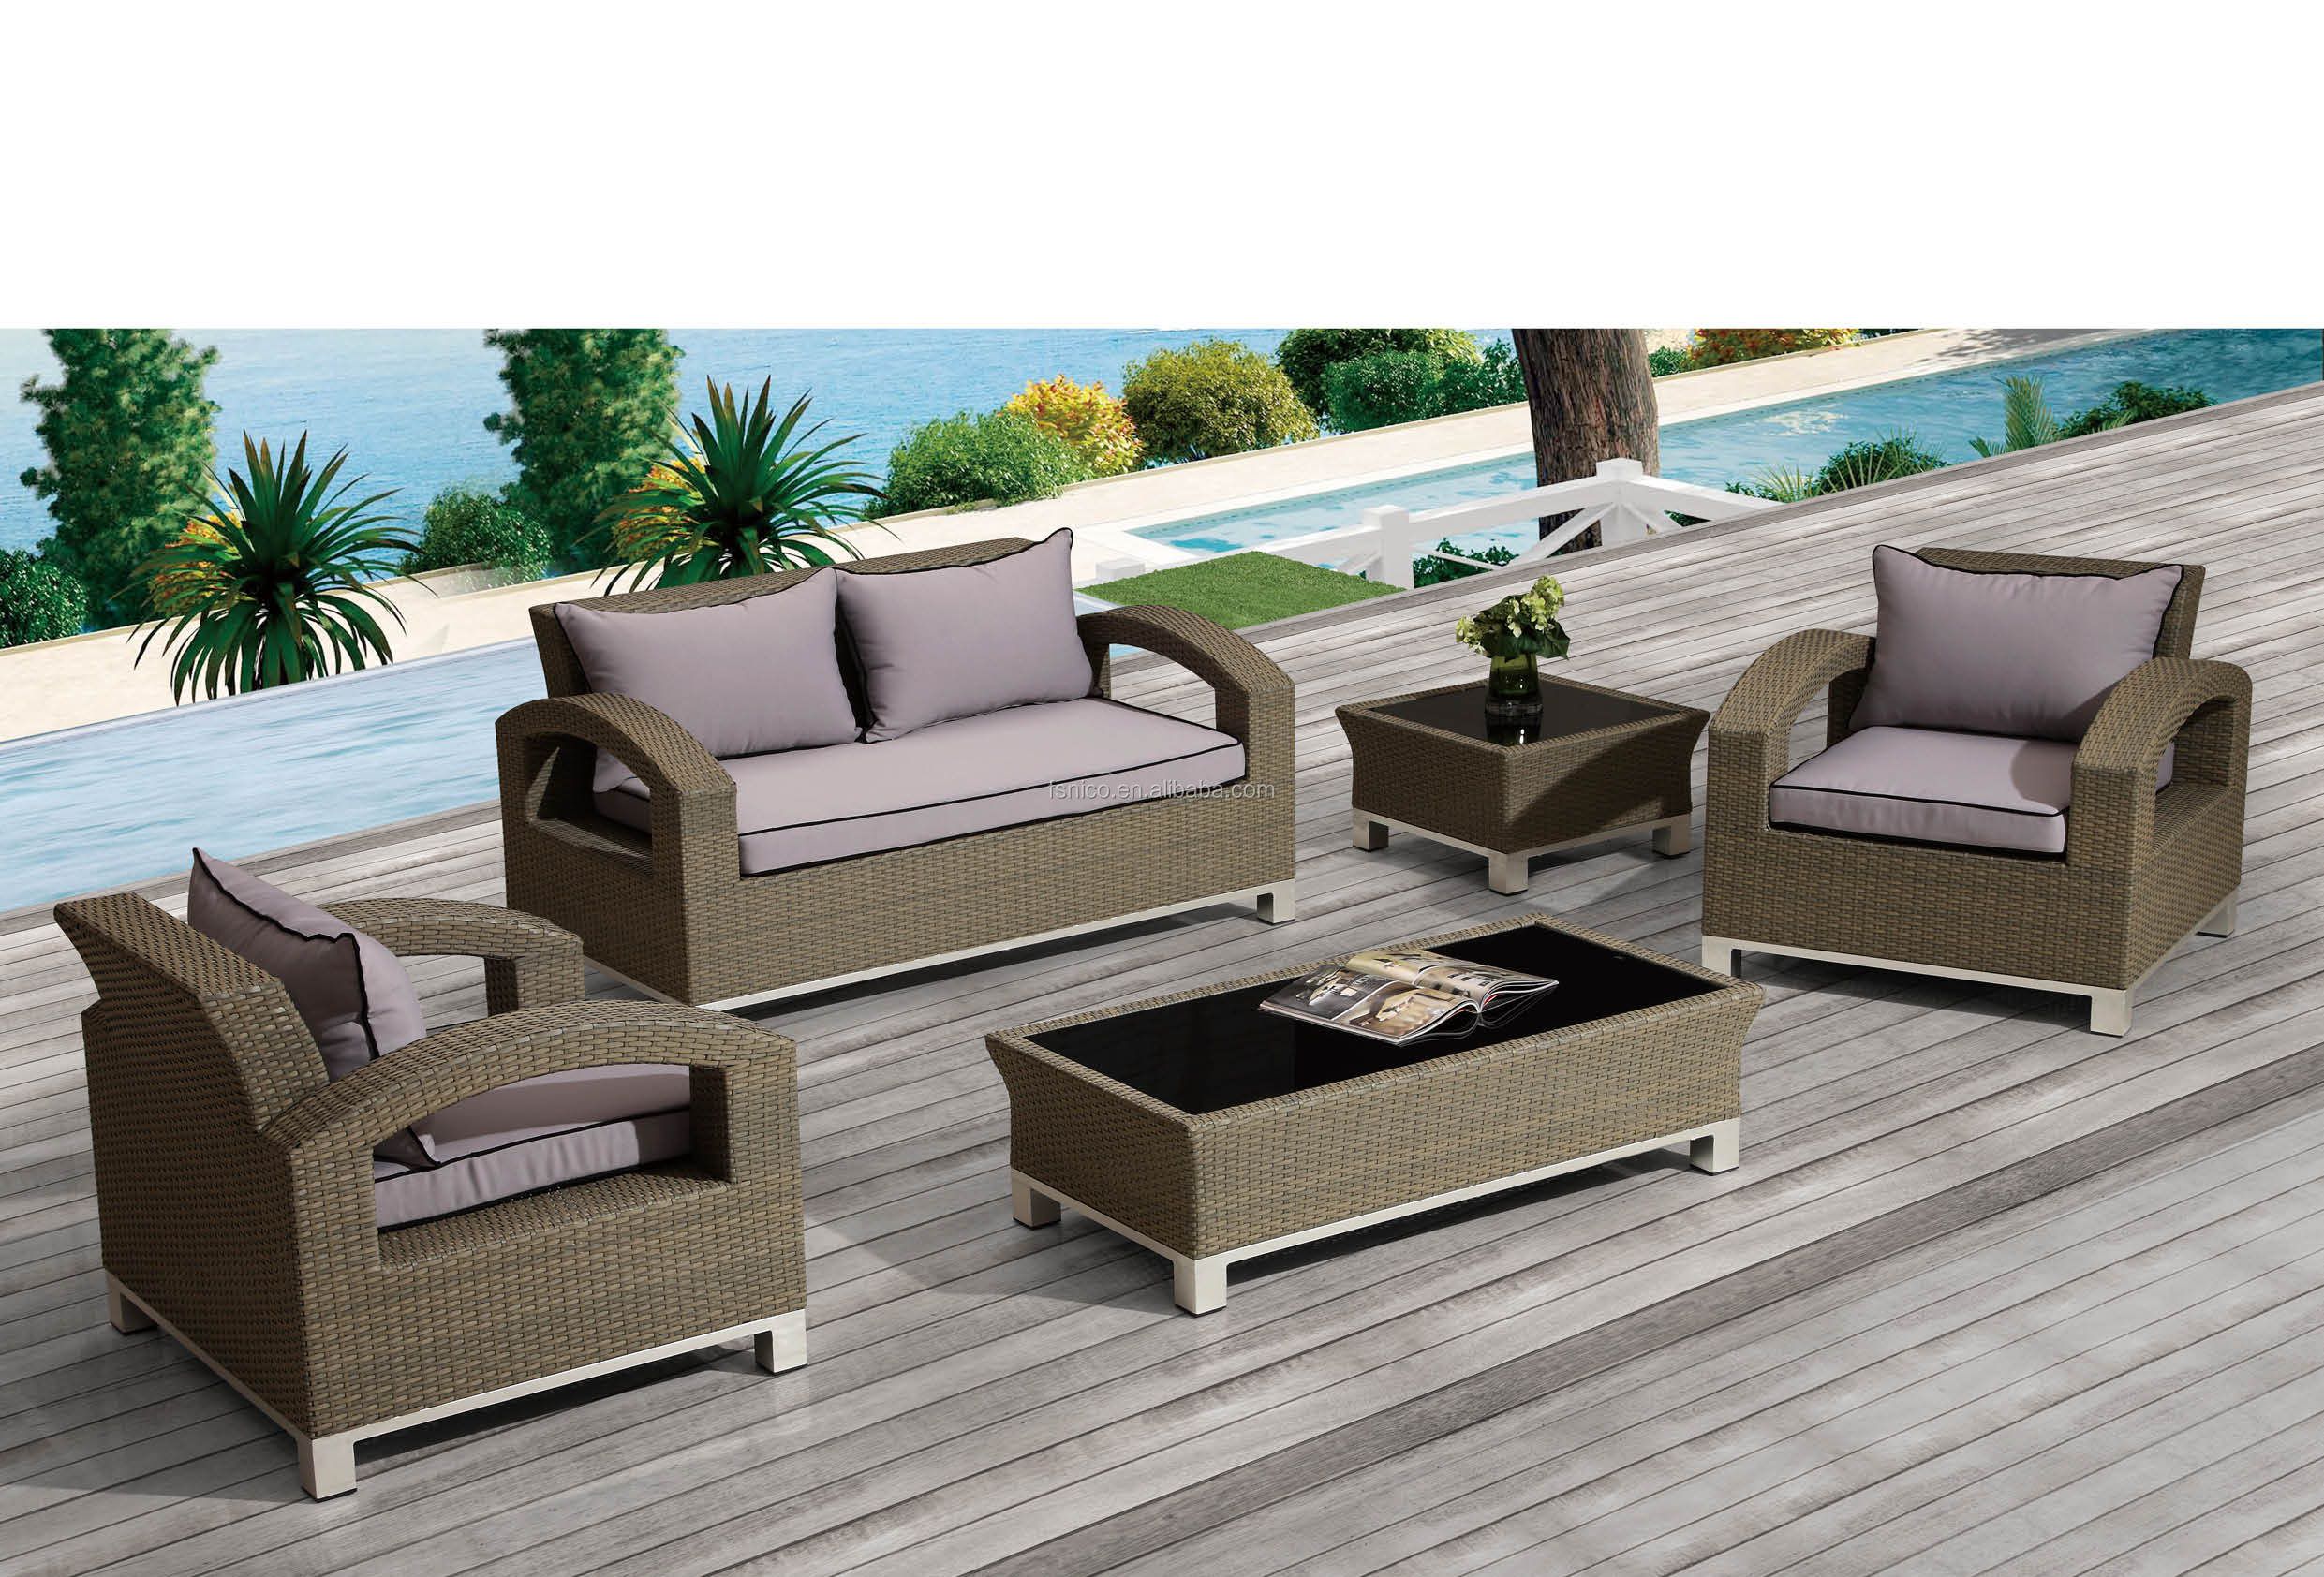 Lowes Modern Patio Broyhill Outdoor Furniture Extra Large Garden Set Pertaining To Fabric Outdoor Patio Sets (View 12 of 15)